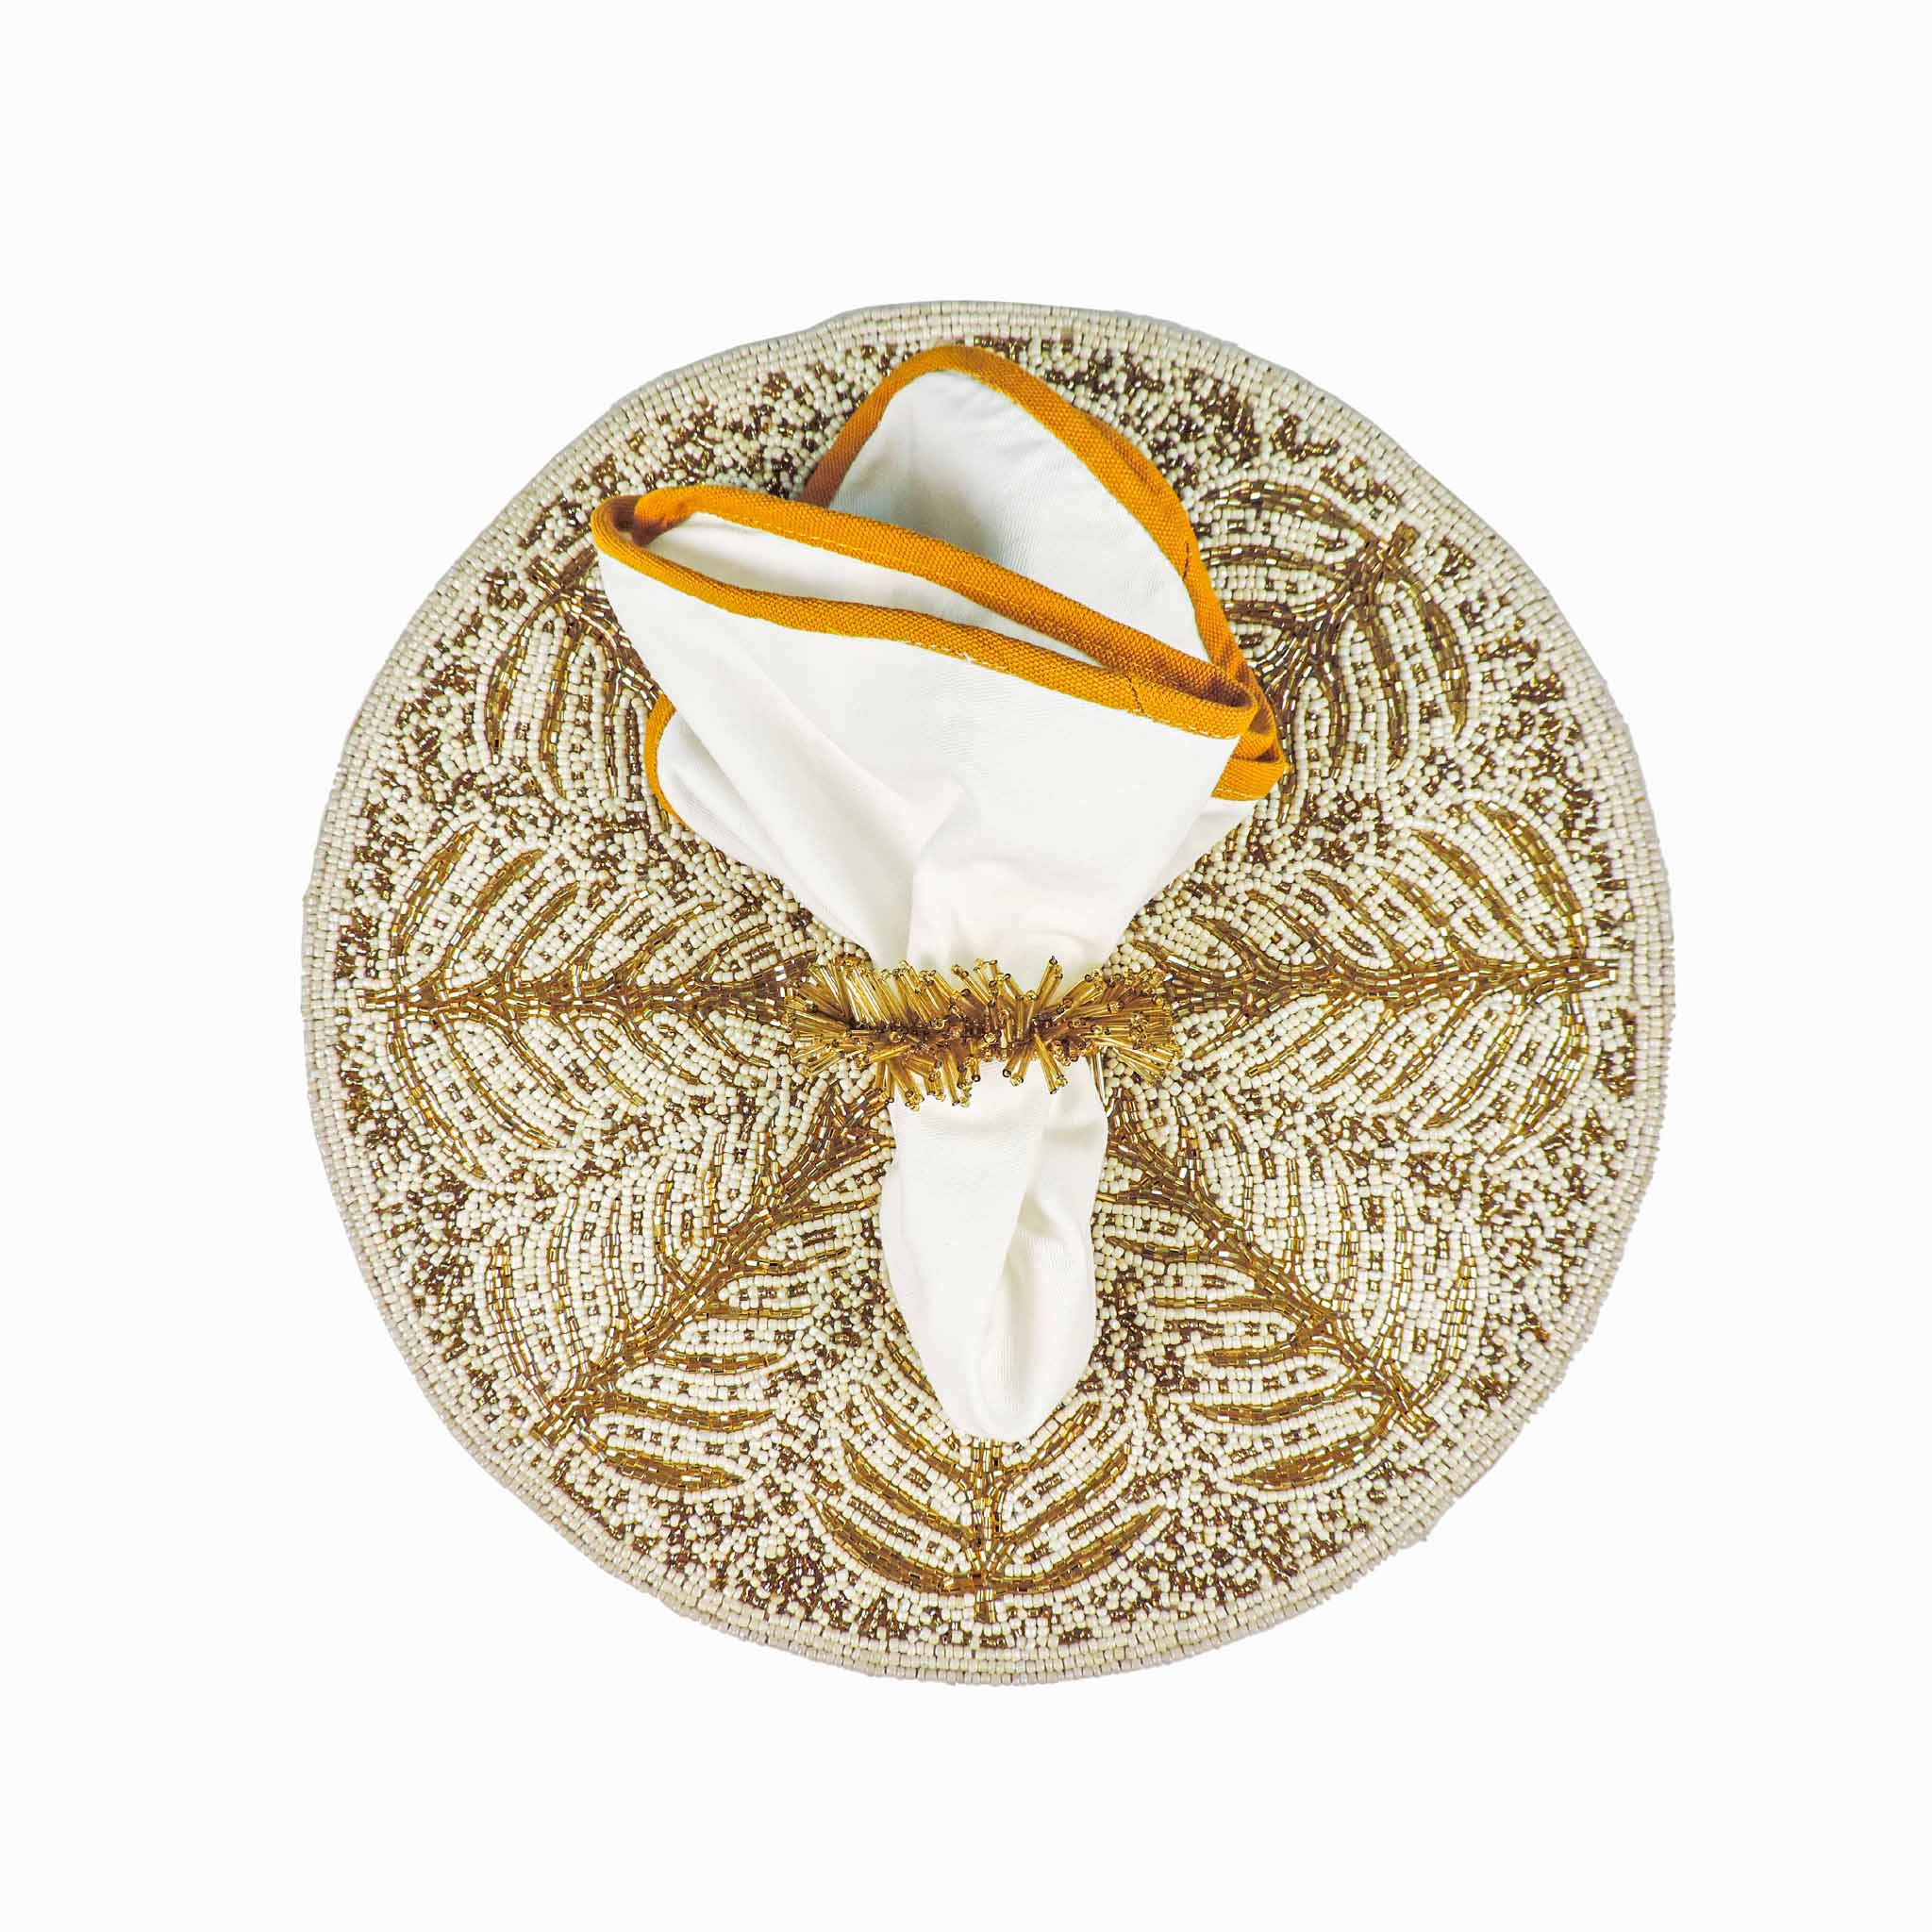 Tree of Life Glass Bead Embroidered Placemat in Cream & Gold, Set of 2